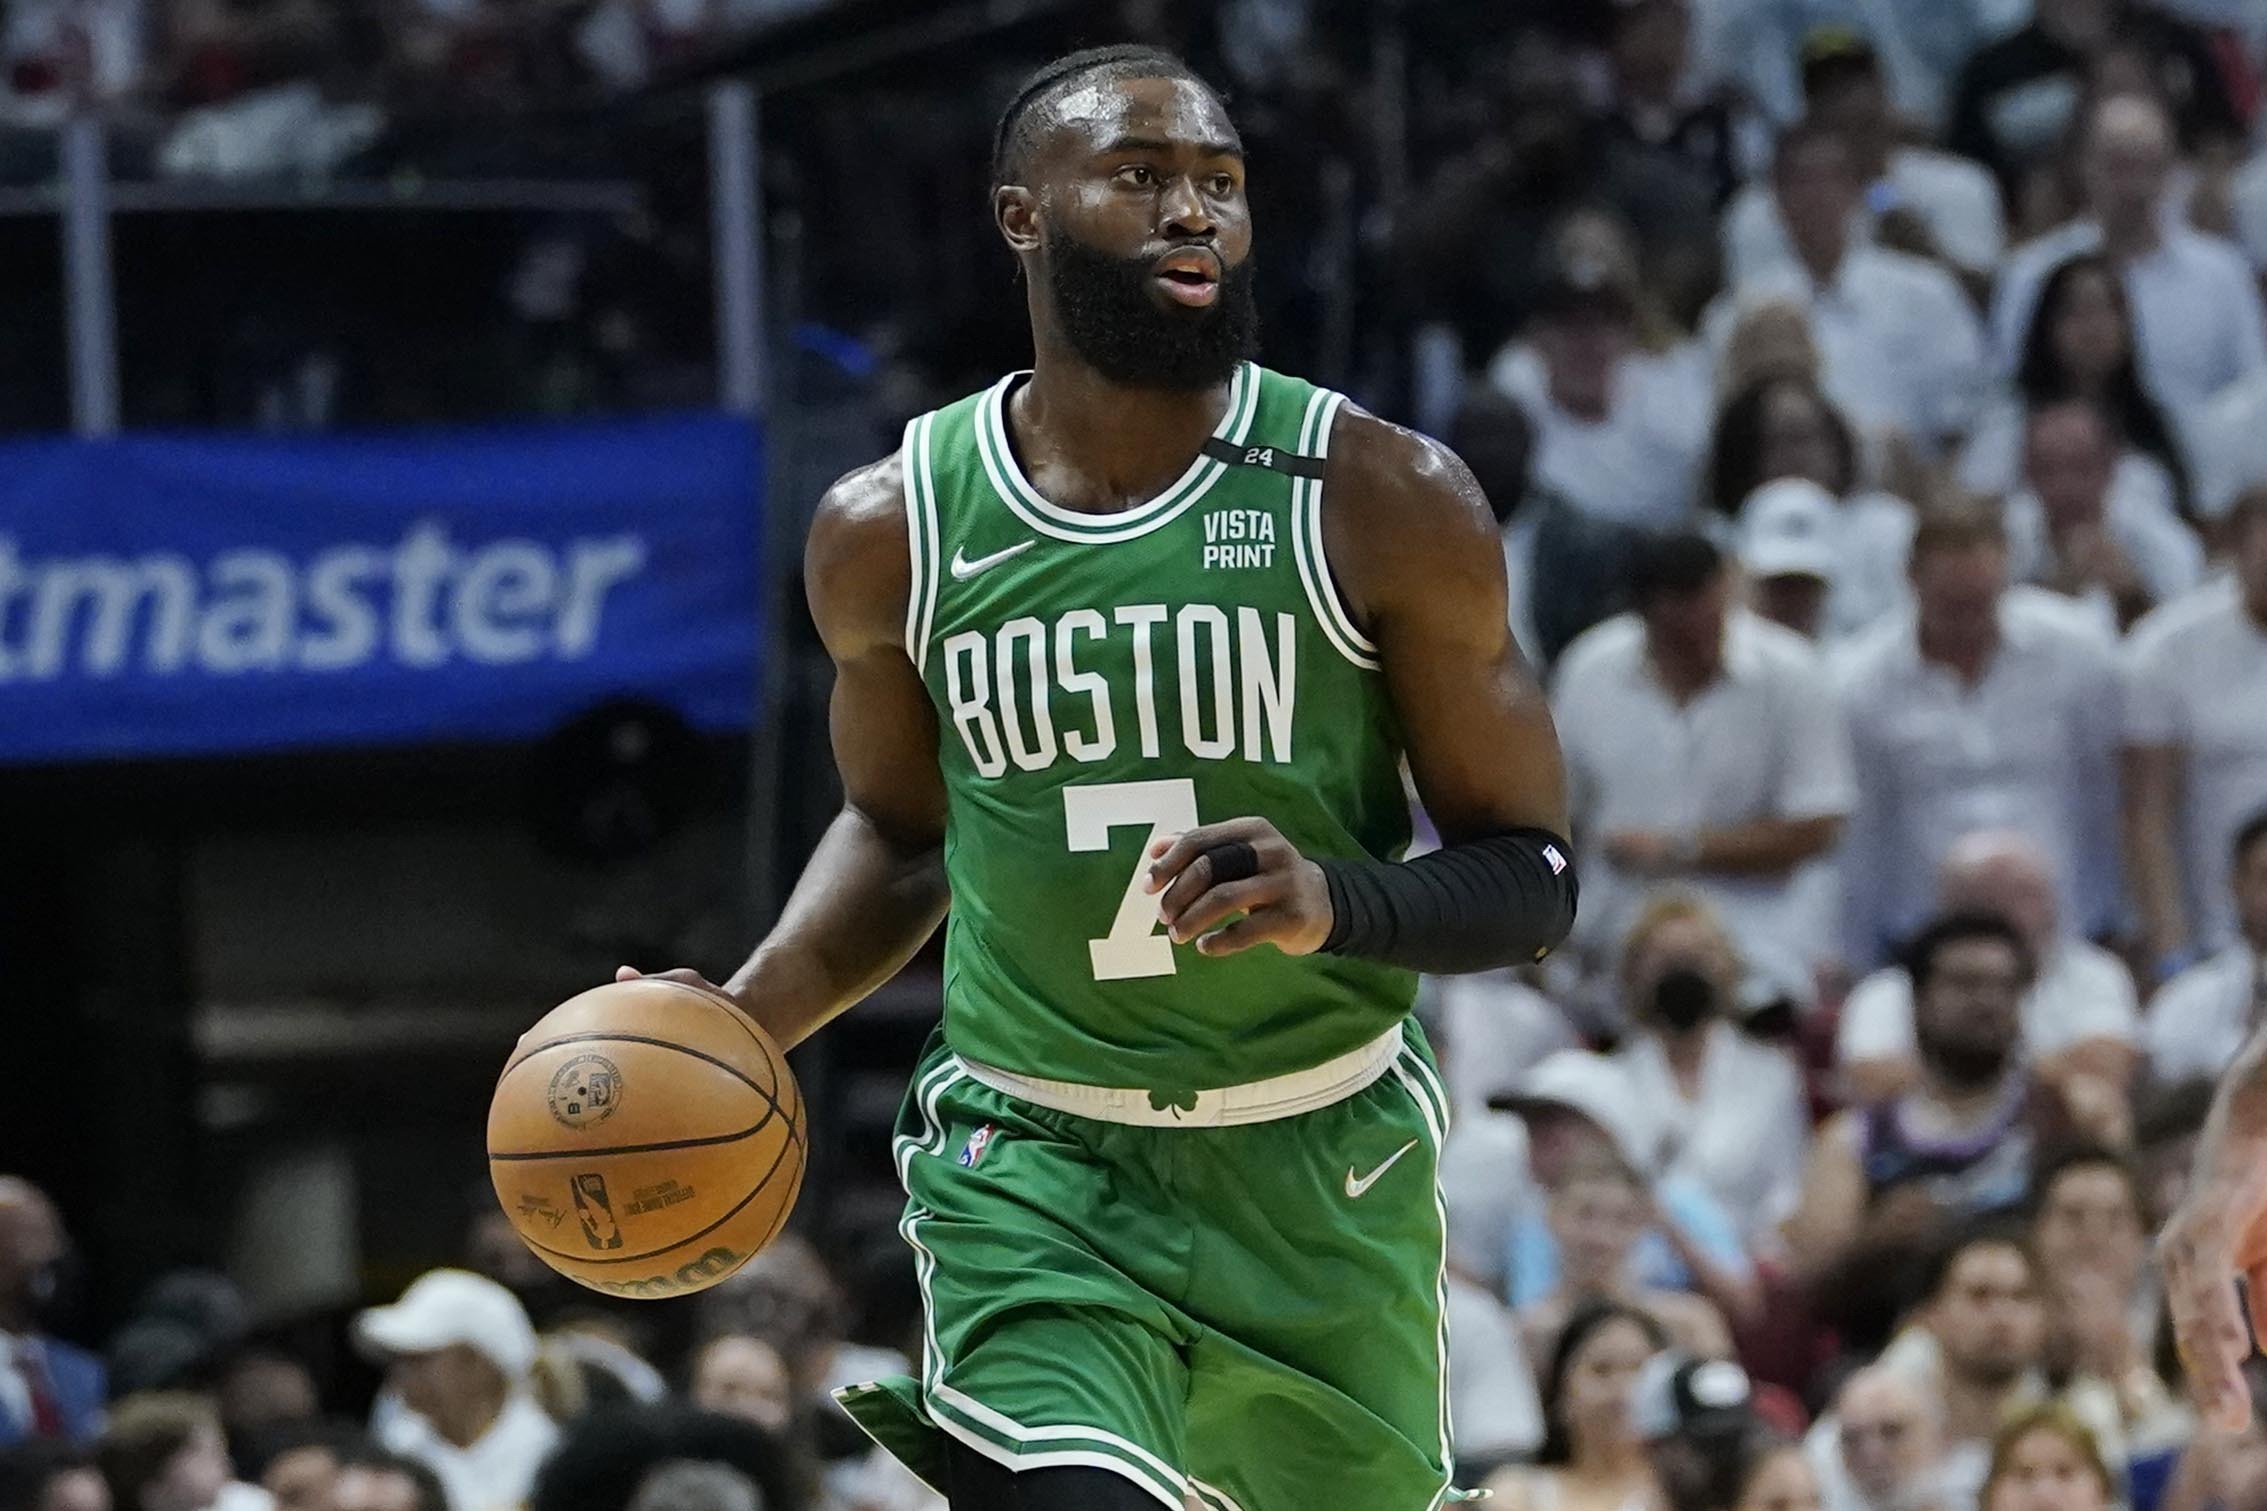 Jaylen Brown agrees the richest deal in NBA history as he puts pen